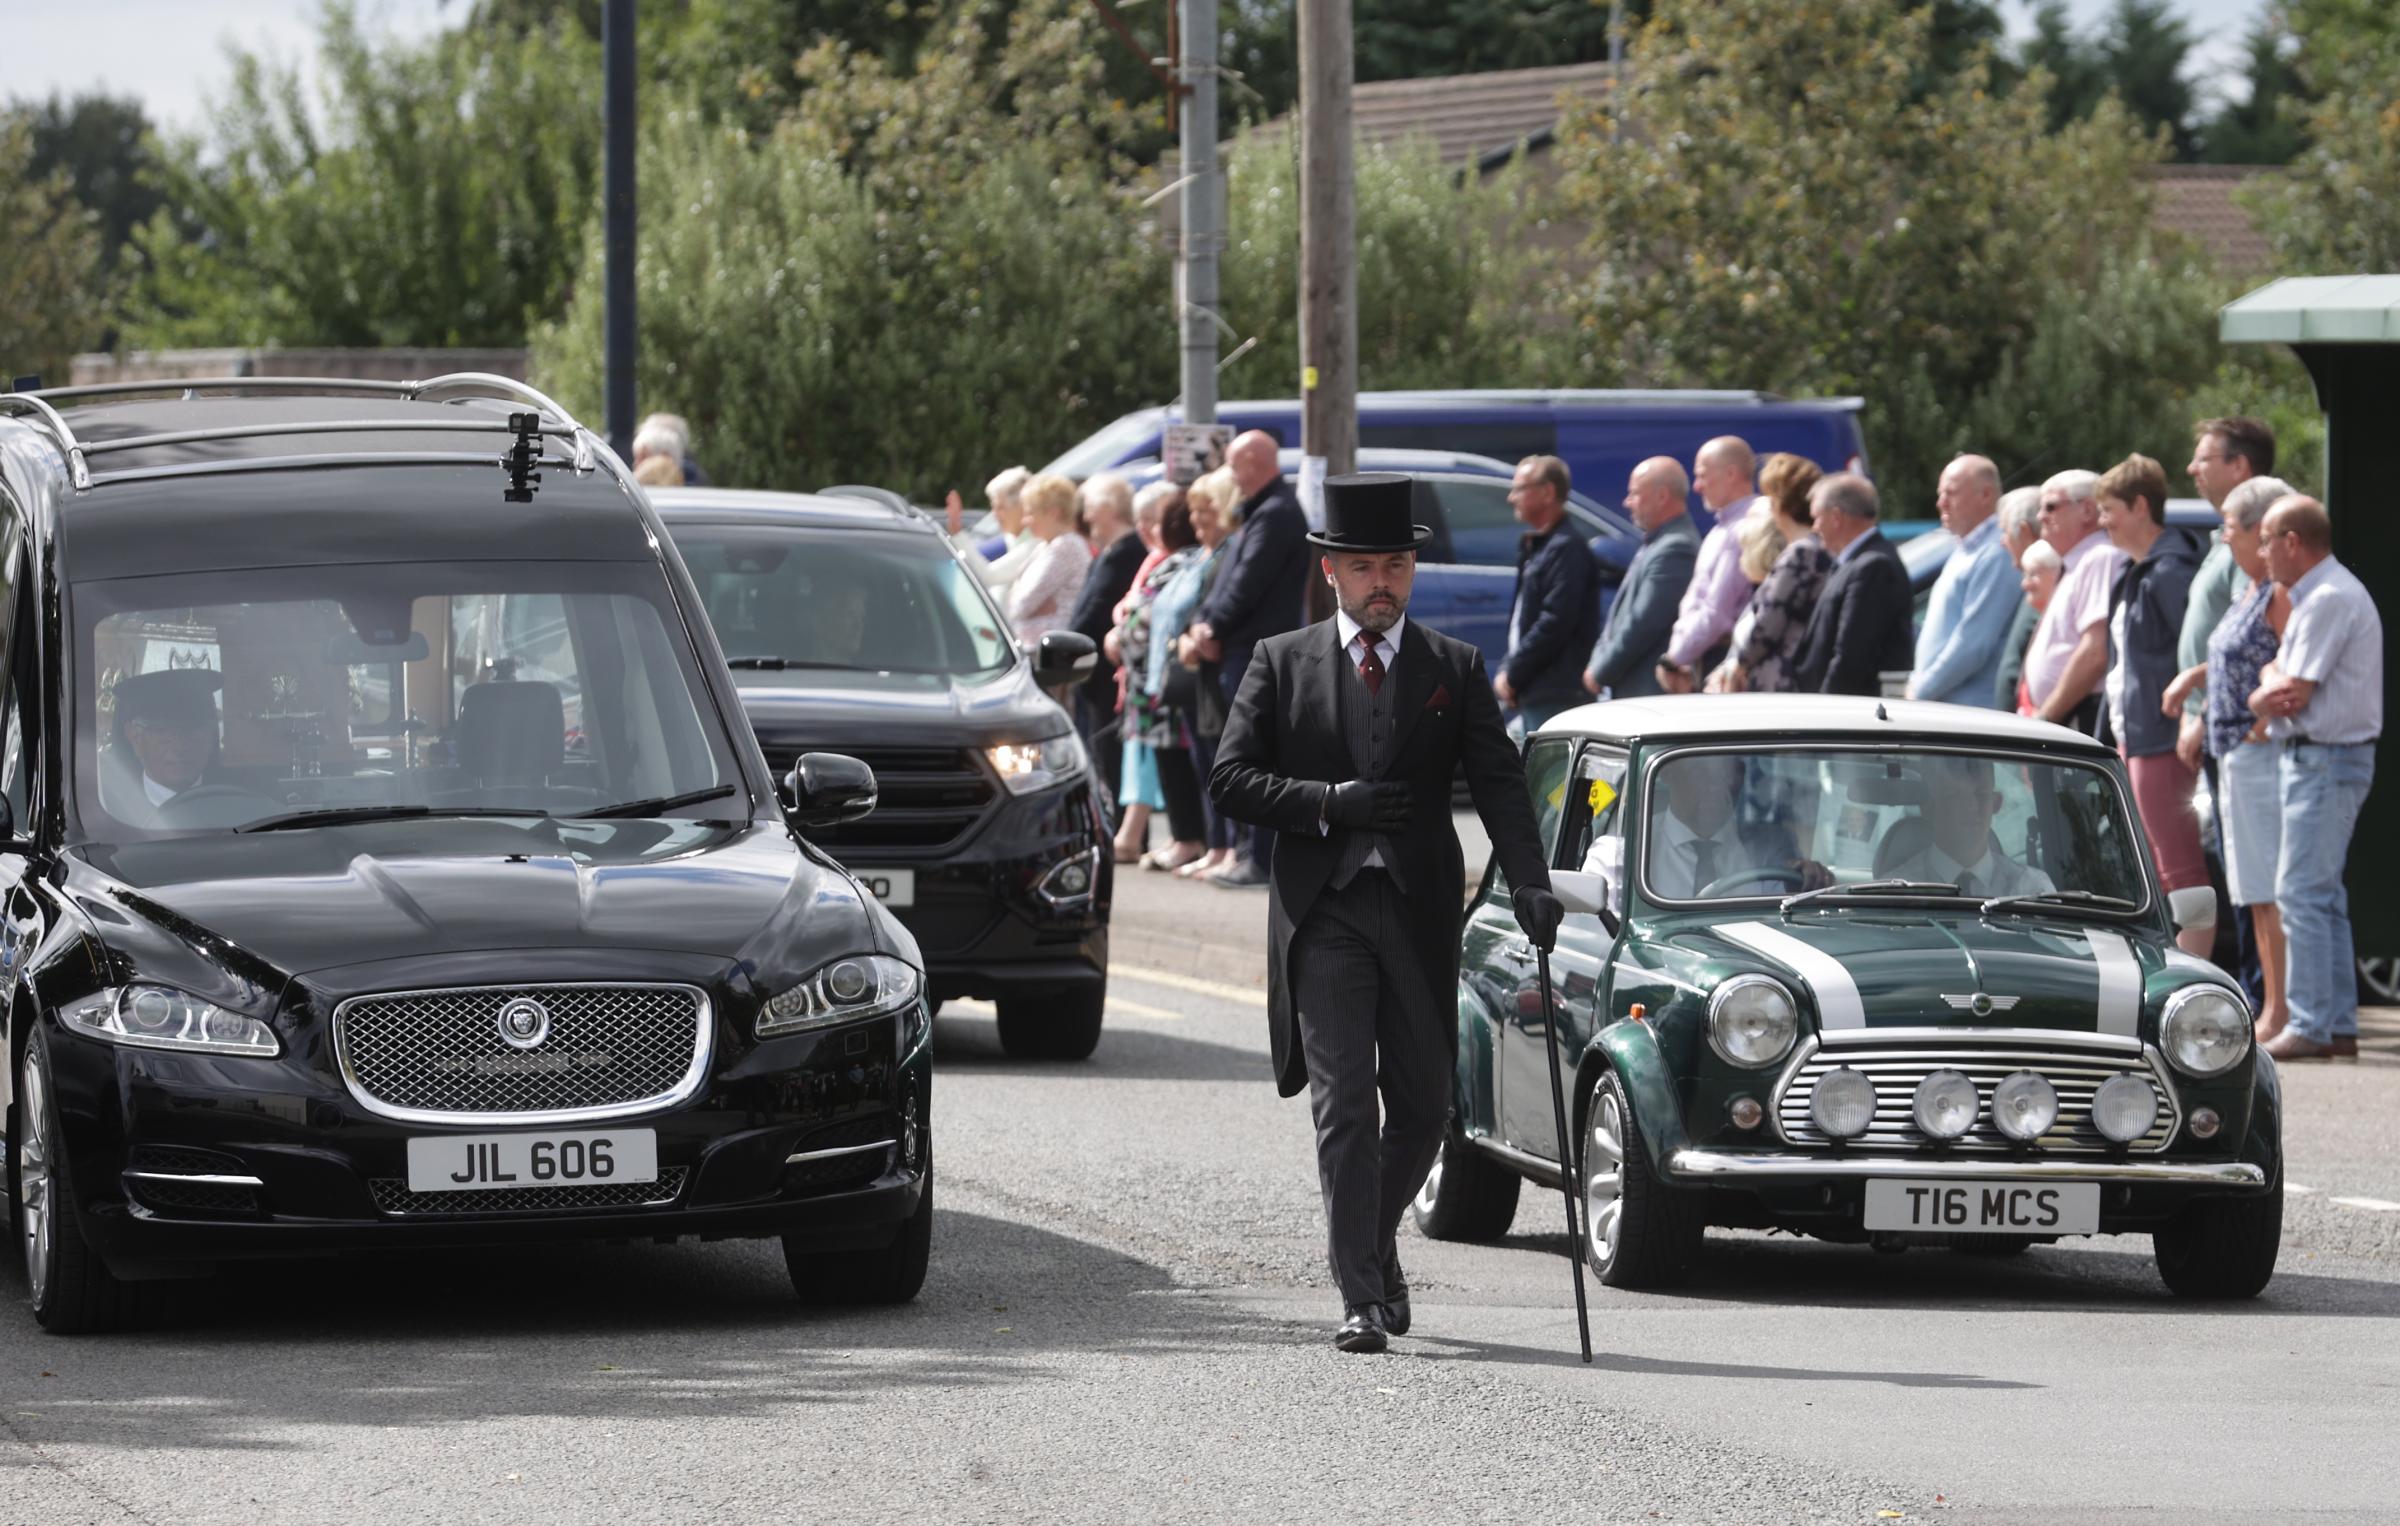 Hundreds line the street to pay their respects to the late William Lyons in Fivemiletown.